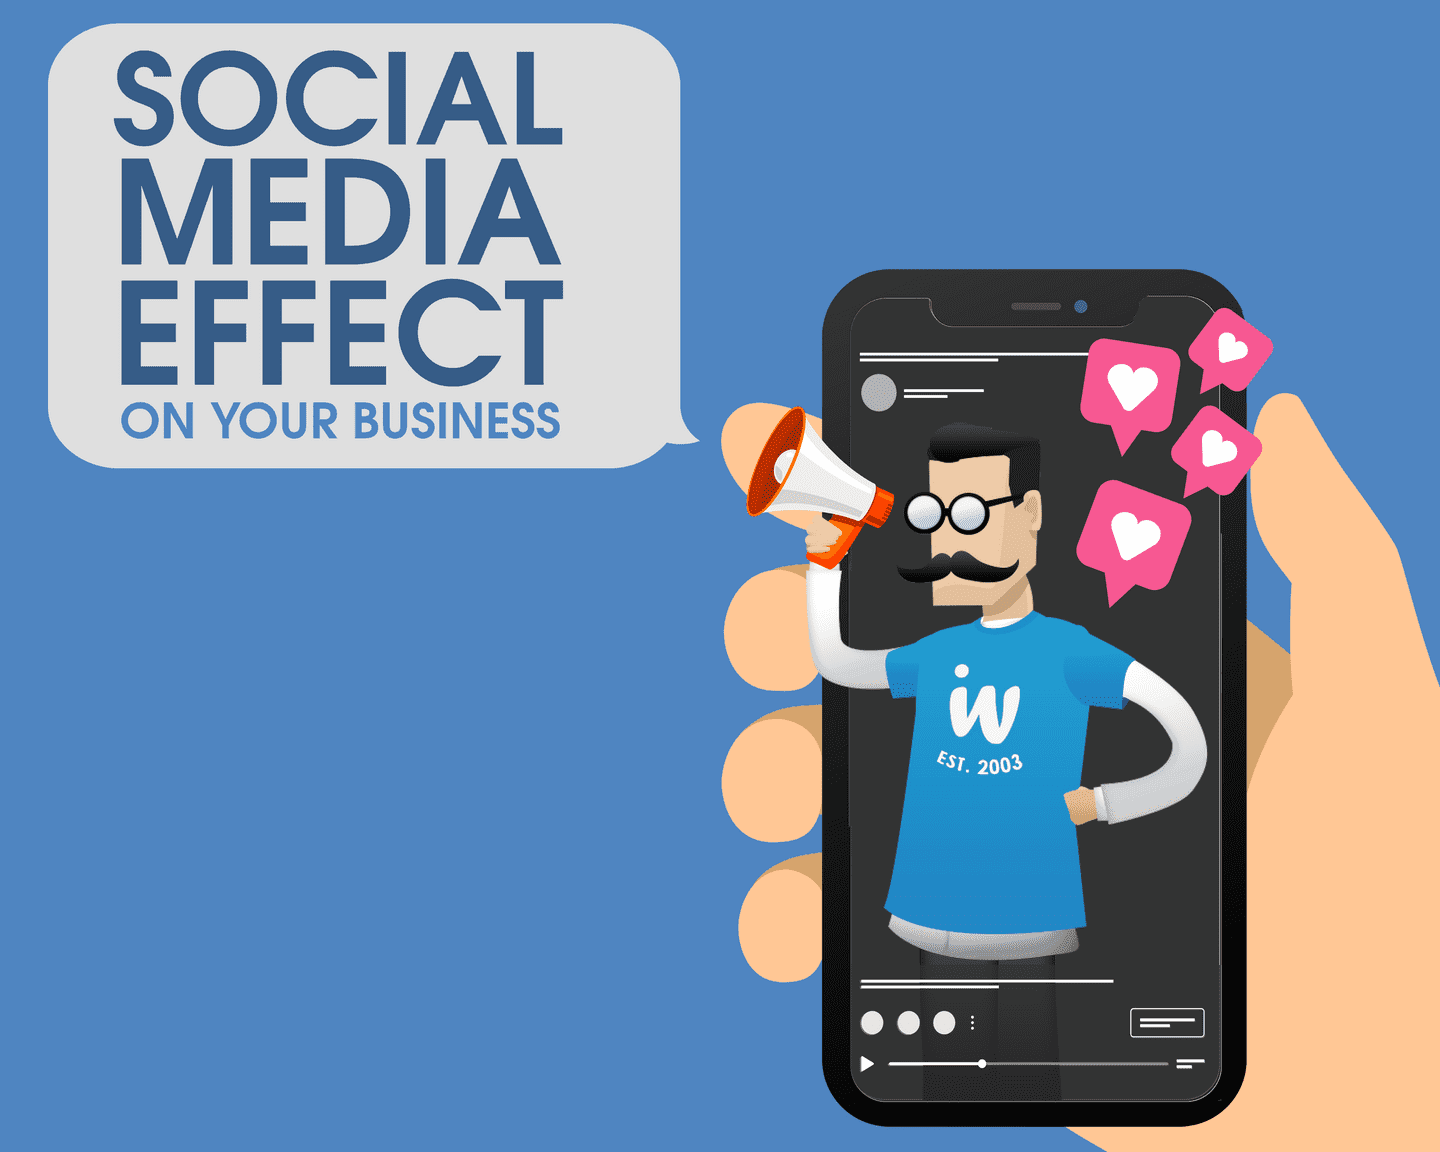 Social Media's Effect on Your Business